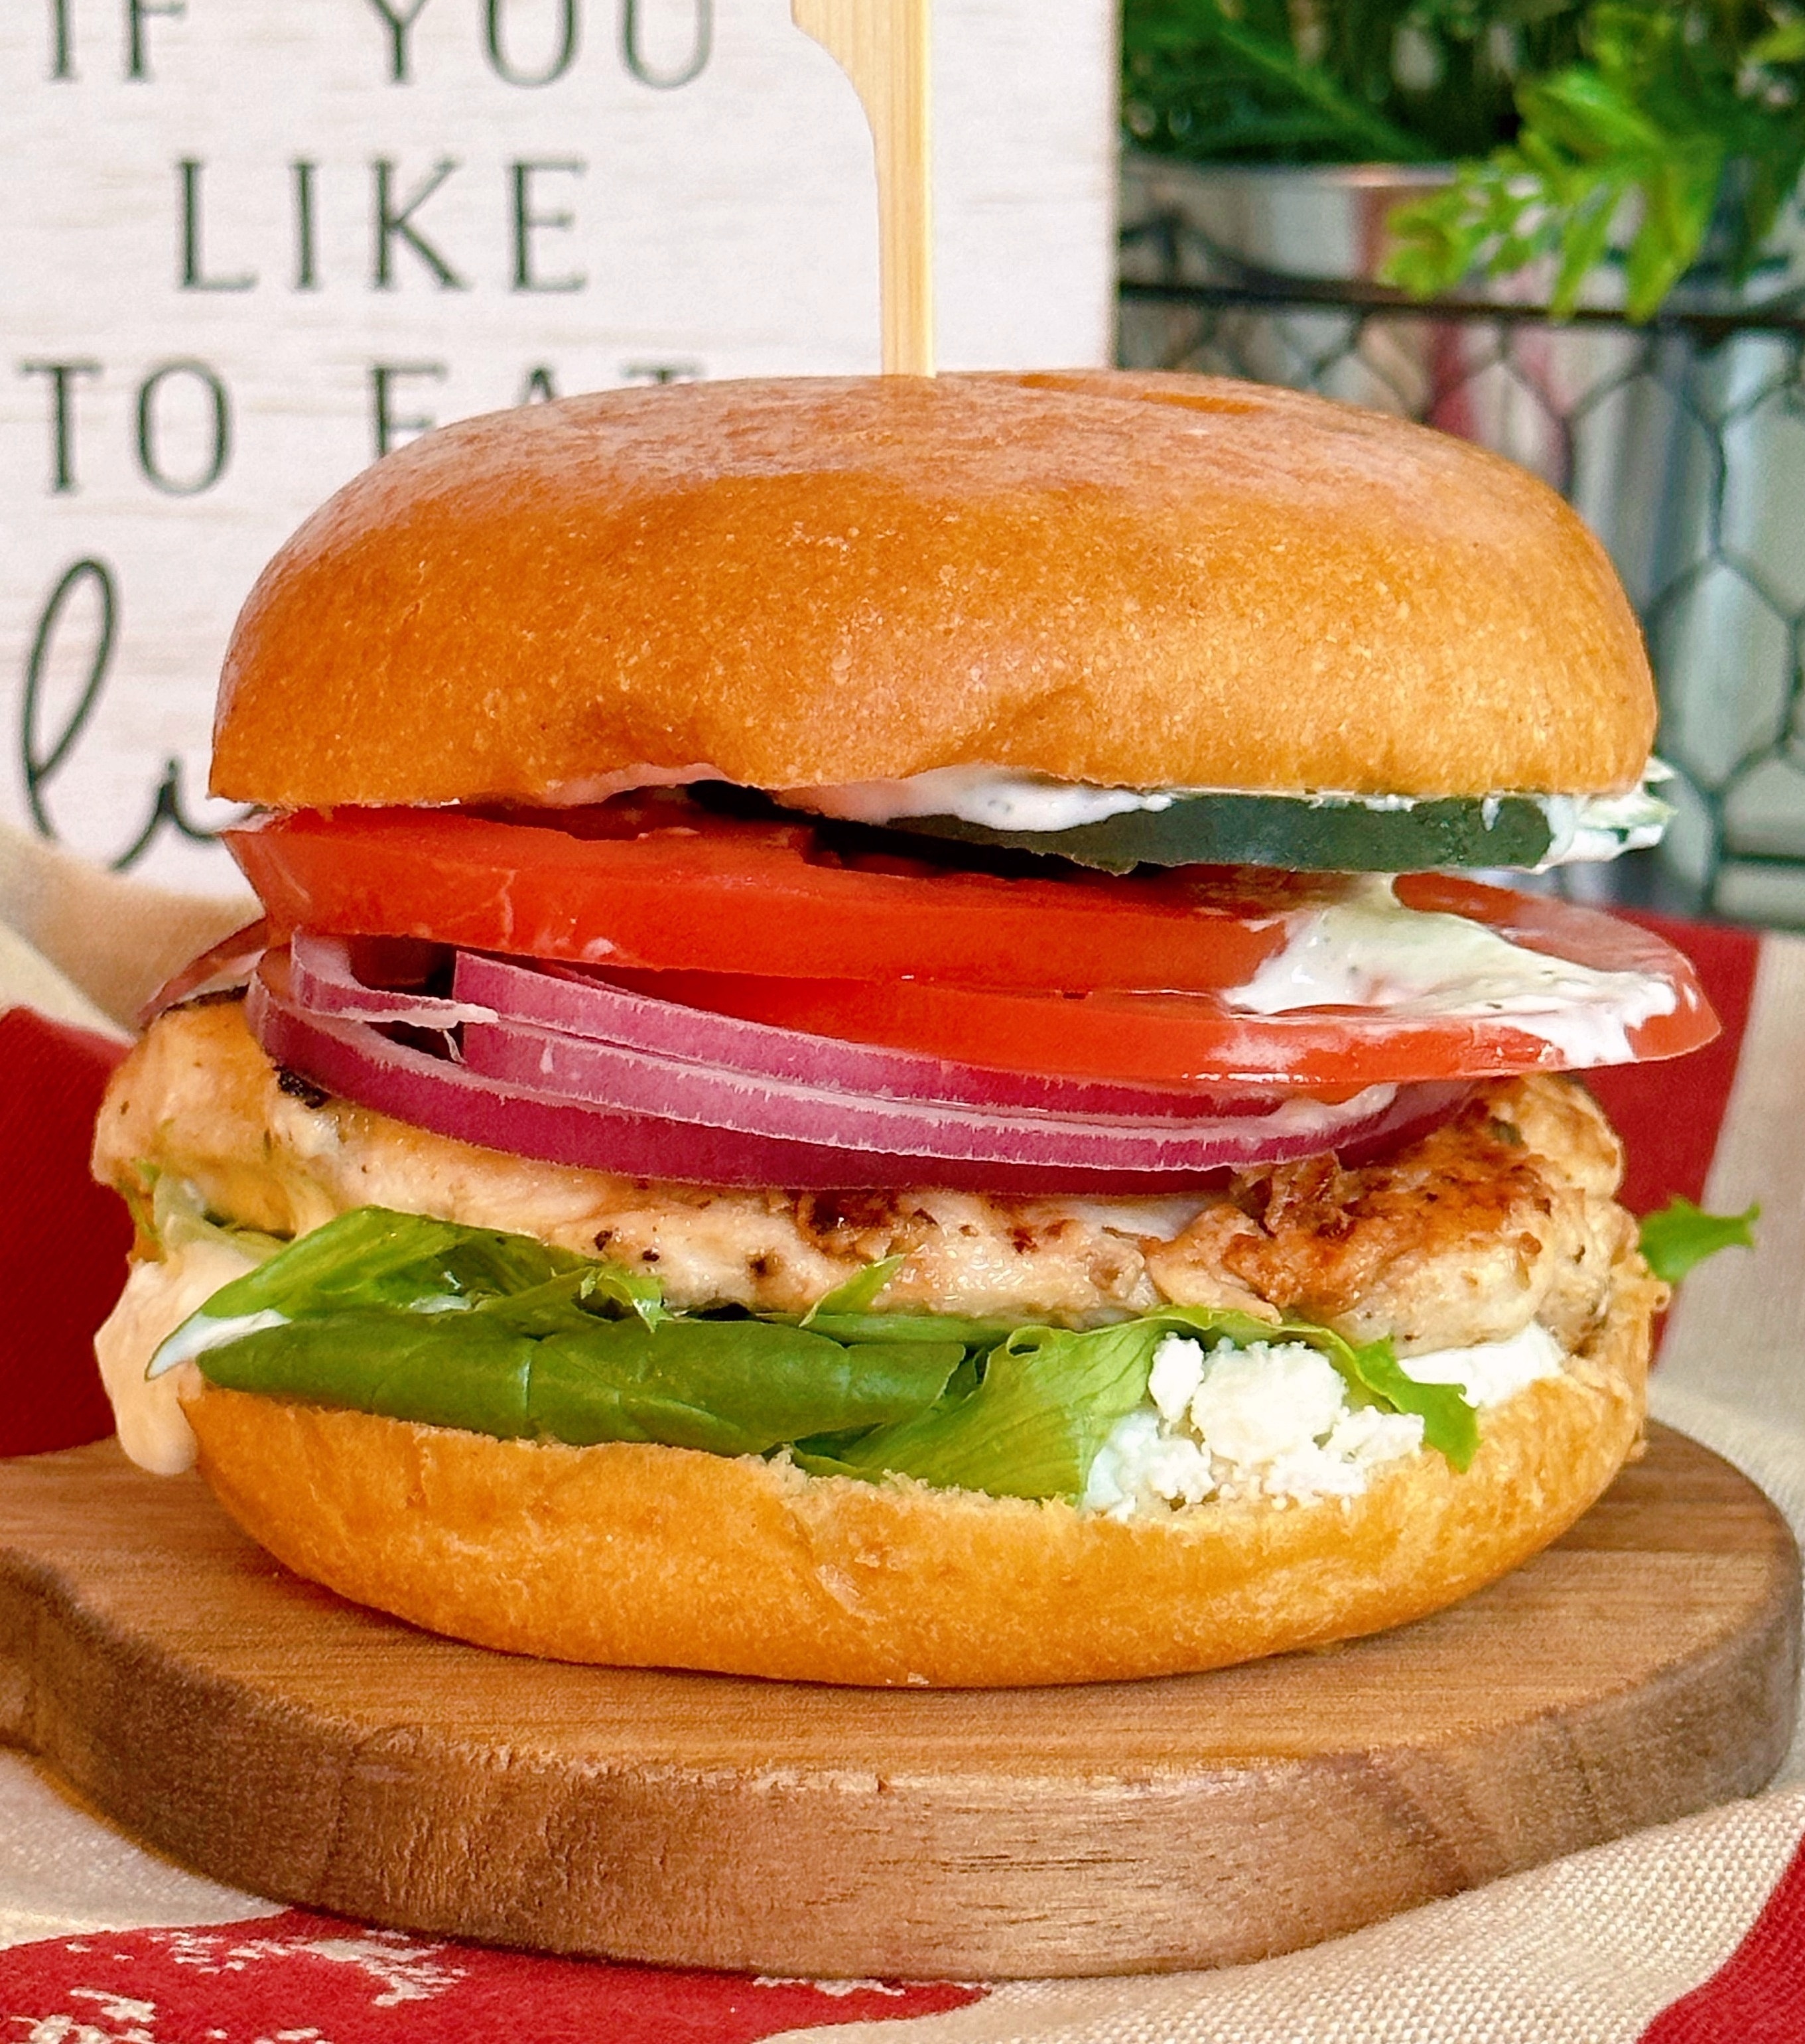 Mediterranean Chicken Sandwich with Dill Sauce up close on a wooden cutting board.